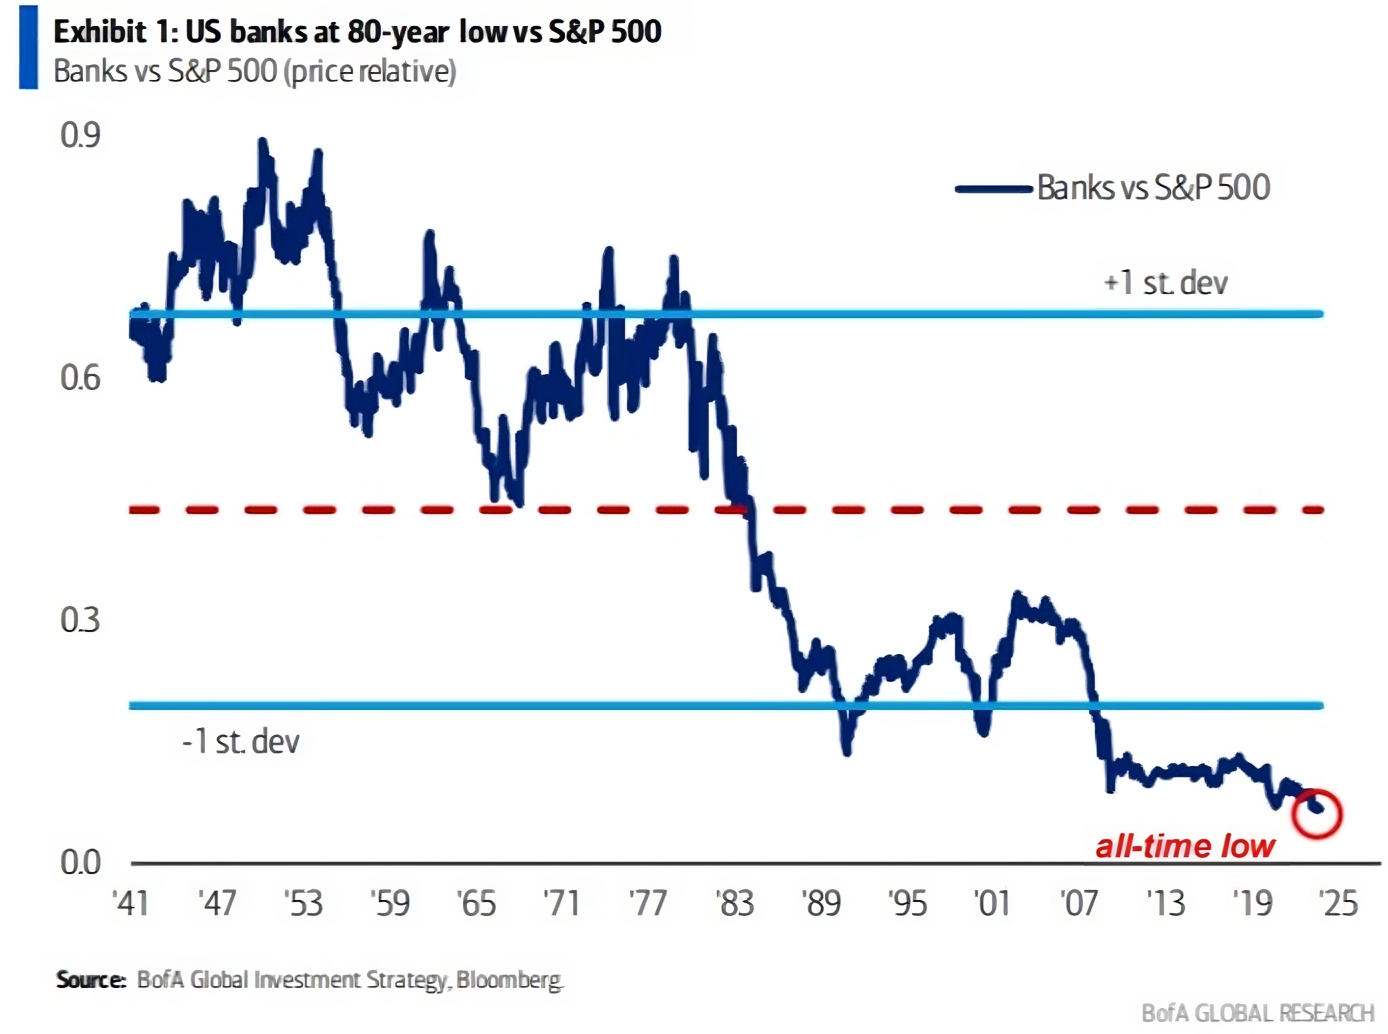 Trading at 80-Year Low Relative to S&P 500: Has the Worst Time for Bank Stocks Passed?